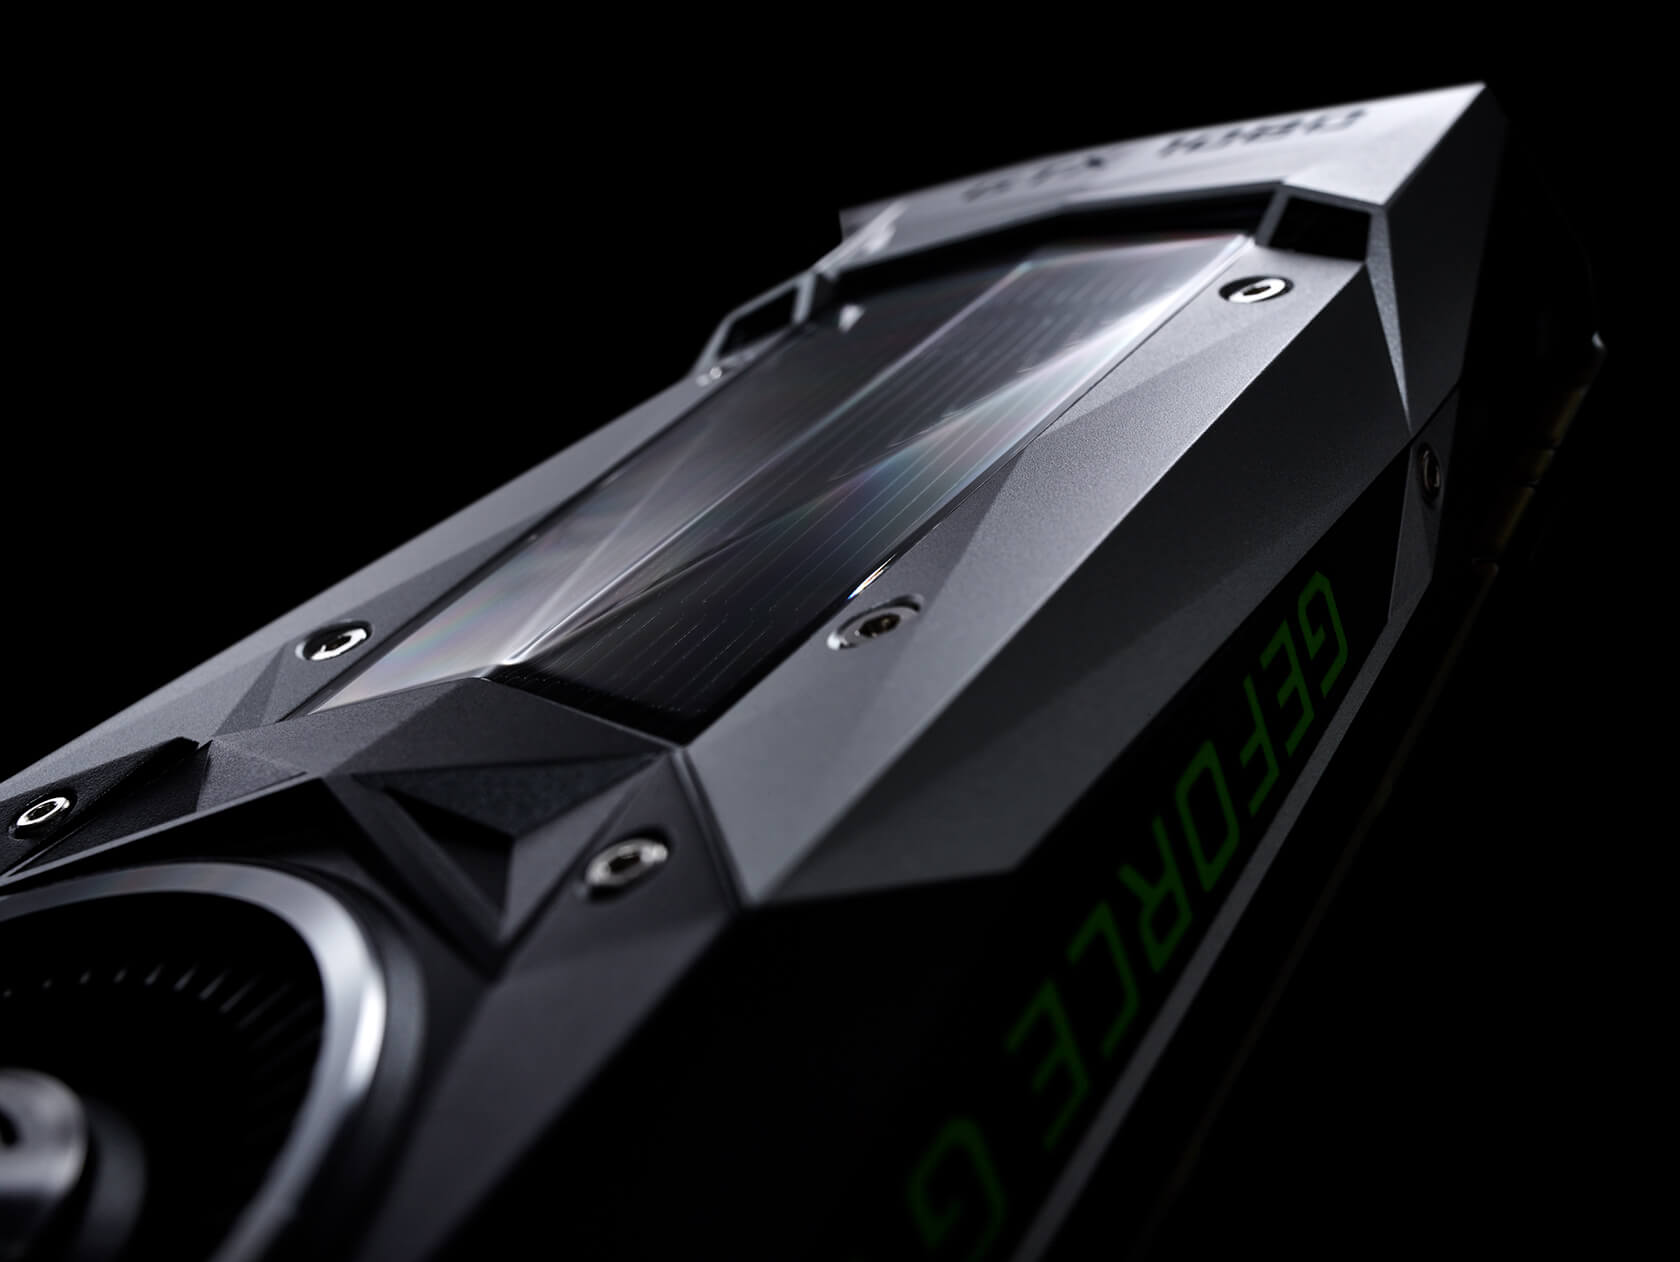 GTX 1180 incoming: Nvidia confirms press event on August 20 at Gamescom